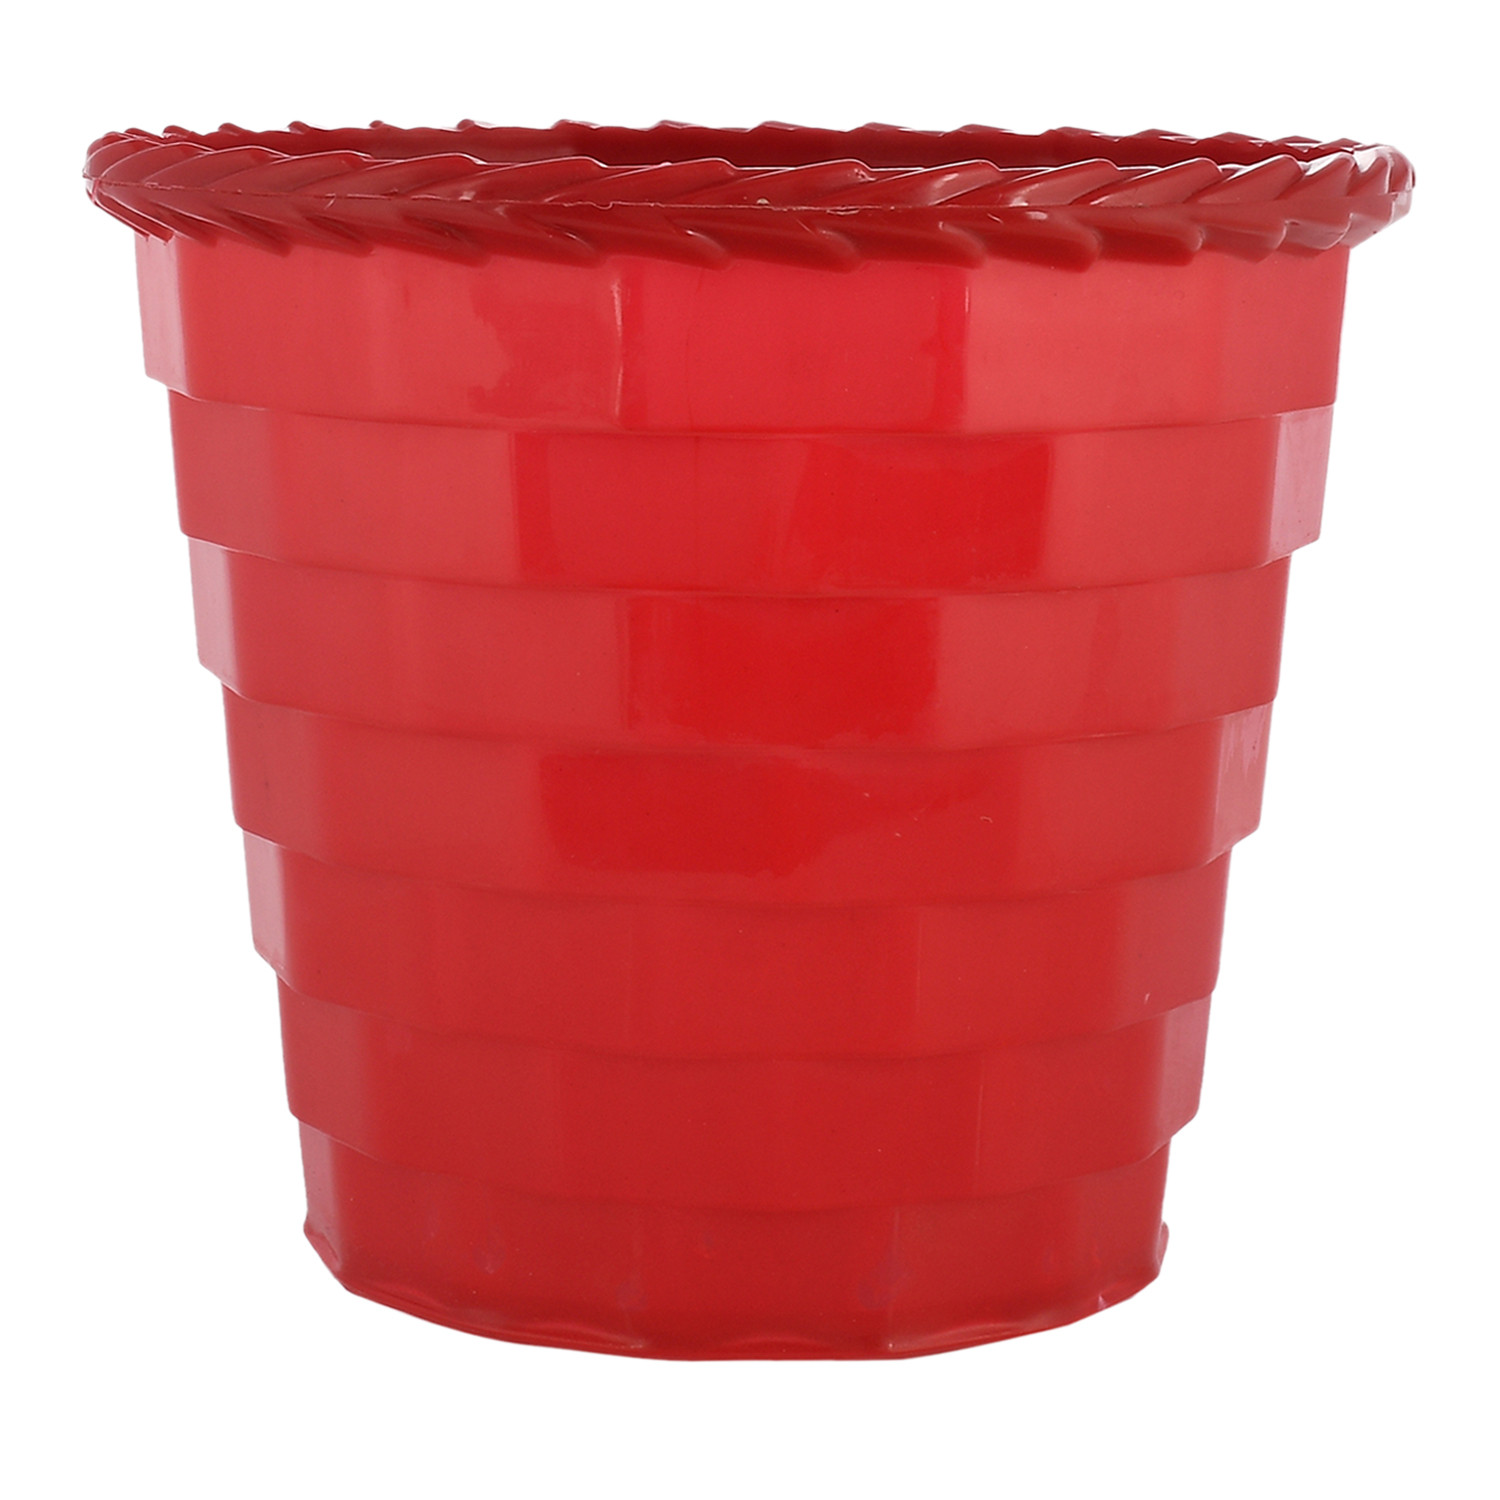 Kuber Industries Brick Flower Pot|Durable Plastic Flower Pots|Planters for Home Décor|Garden|Living Room|Balcony|6 Inch|Pack of 2 (Red & Maroon)